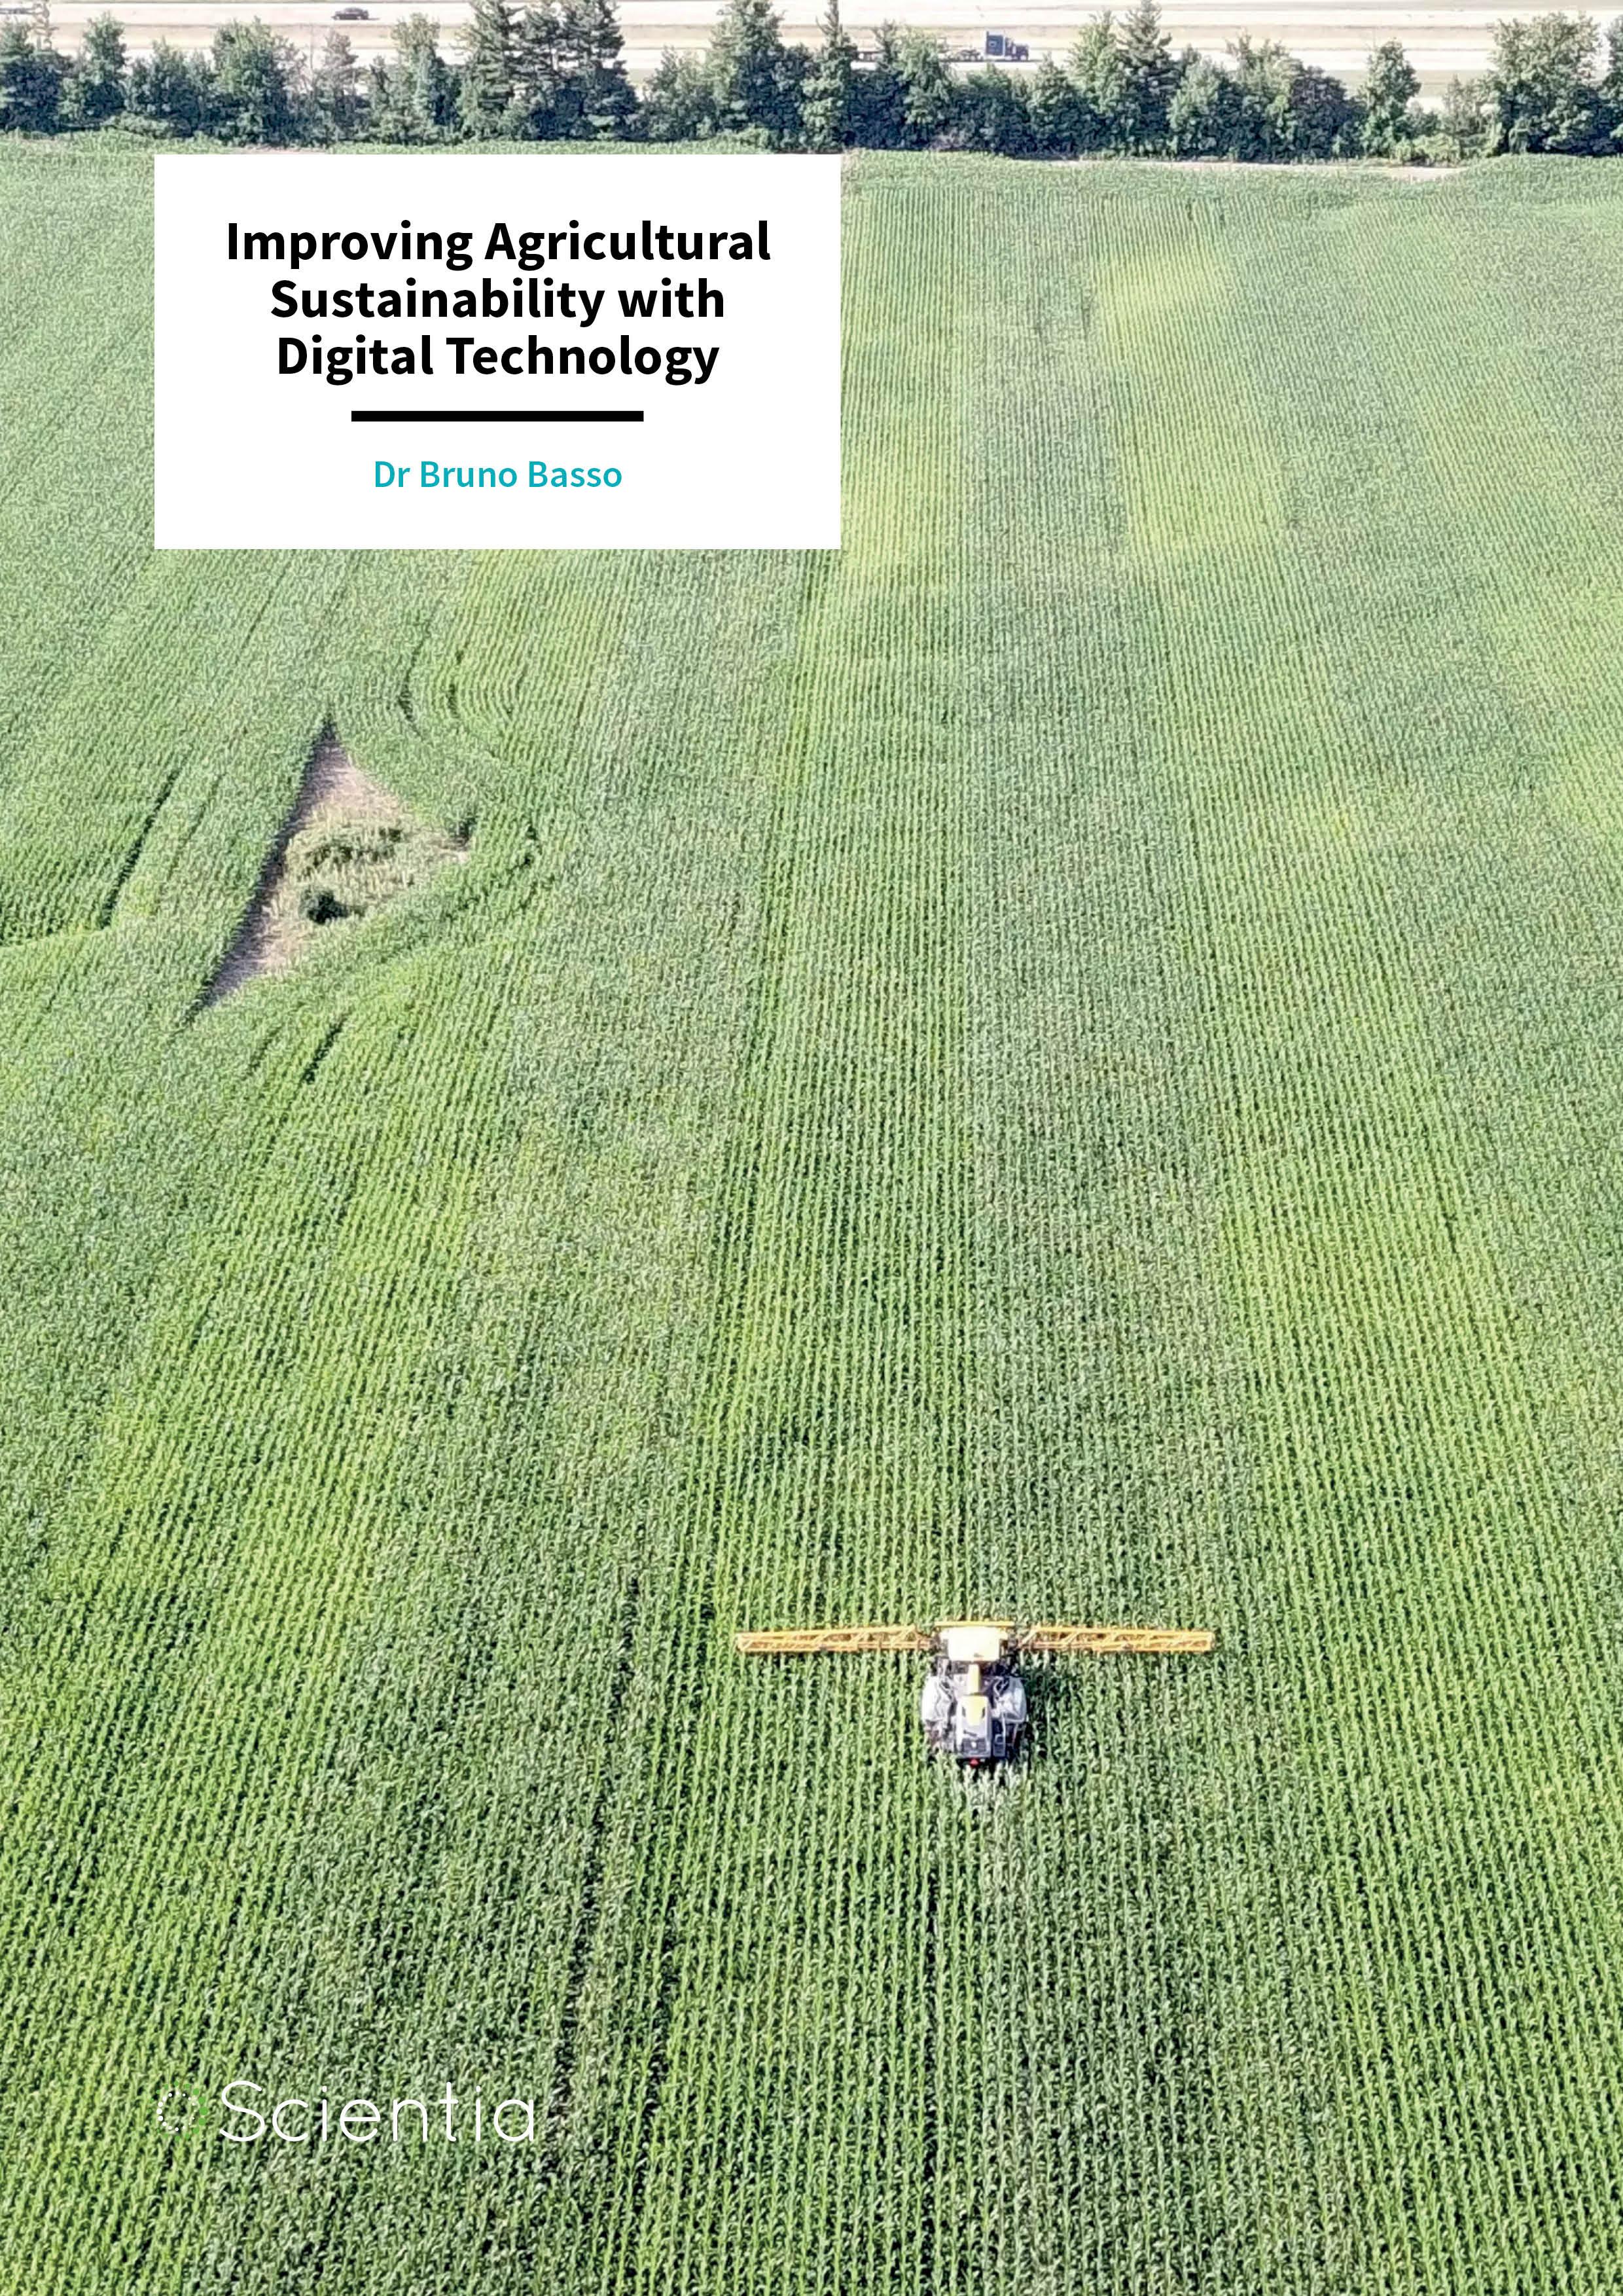 Dr Bruno Basso – Improving Agricultural Sustainability with Digital Technology